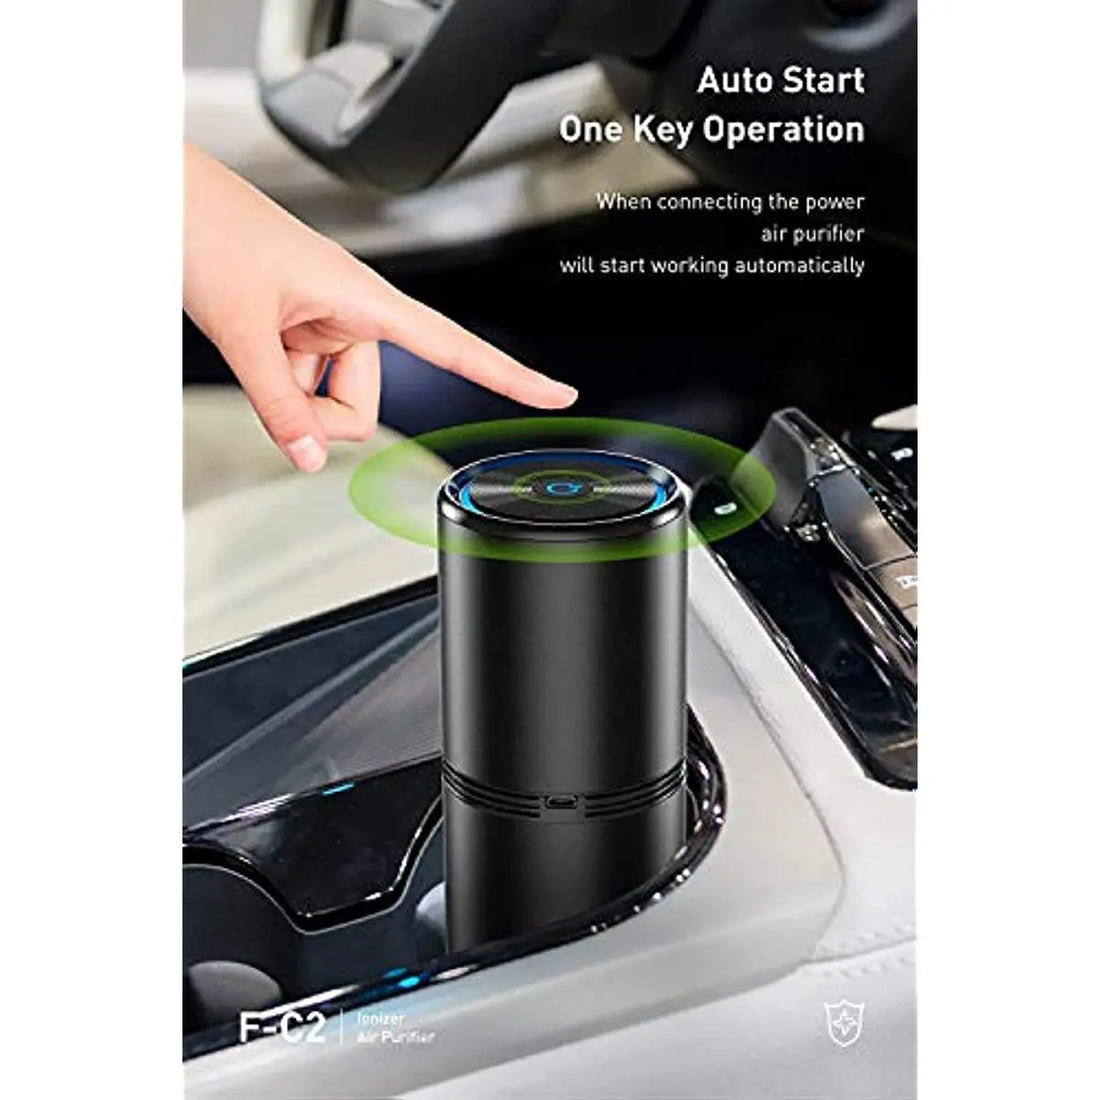 A portable black Ionic Air Purifier designed to improve indoor air quality, operating in a car cup holder, with a power-on illuminating green light by Soulful Trading.